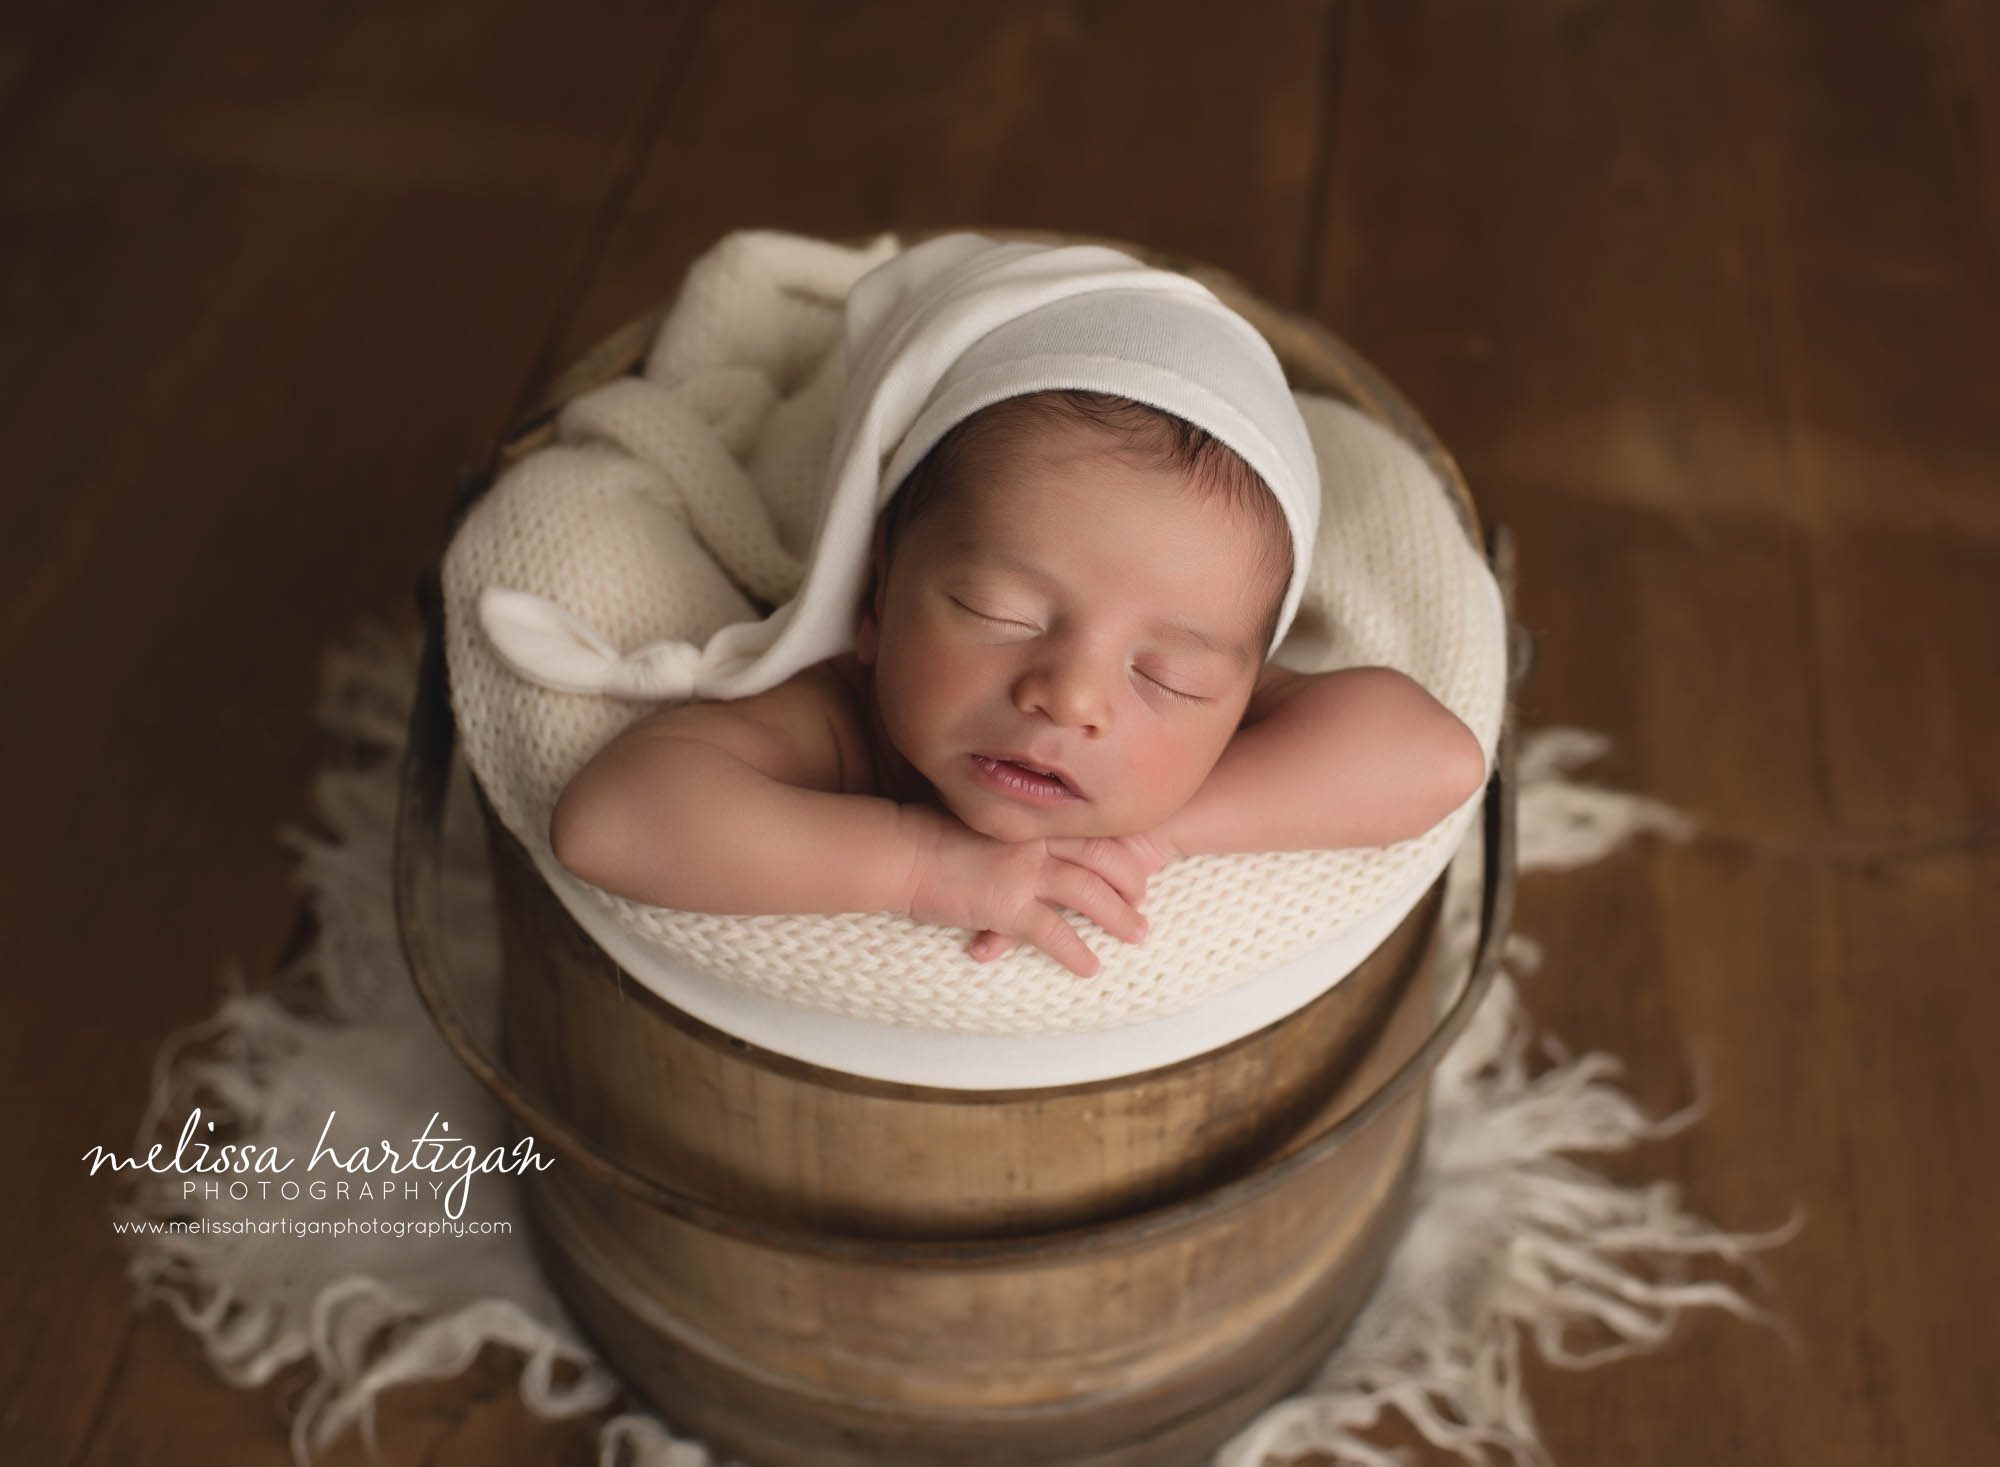 newborn baby boy posed in wooden barrel bucket with cream sleepy cap and cream knitted layer